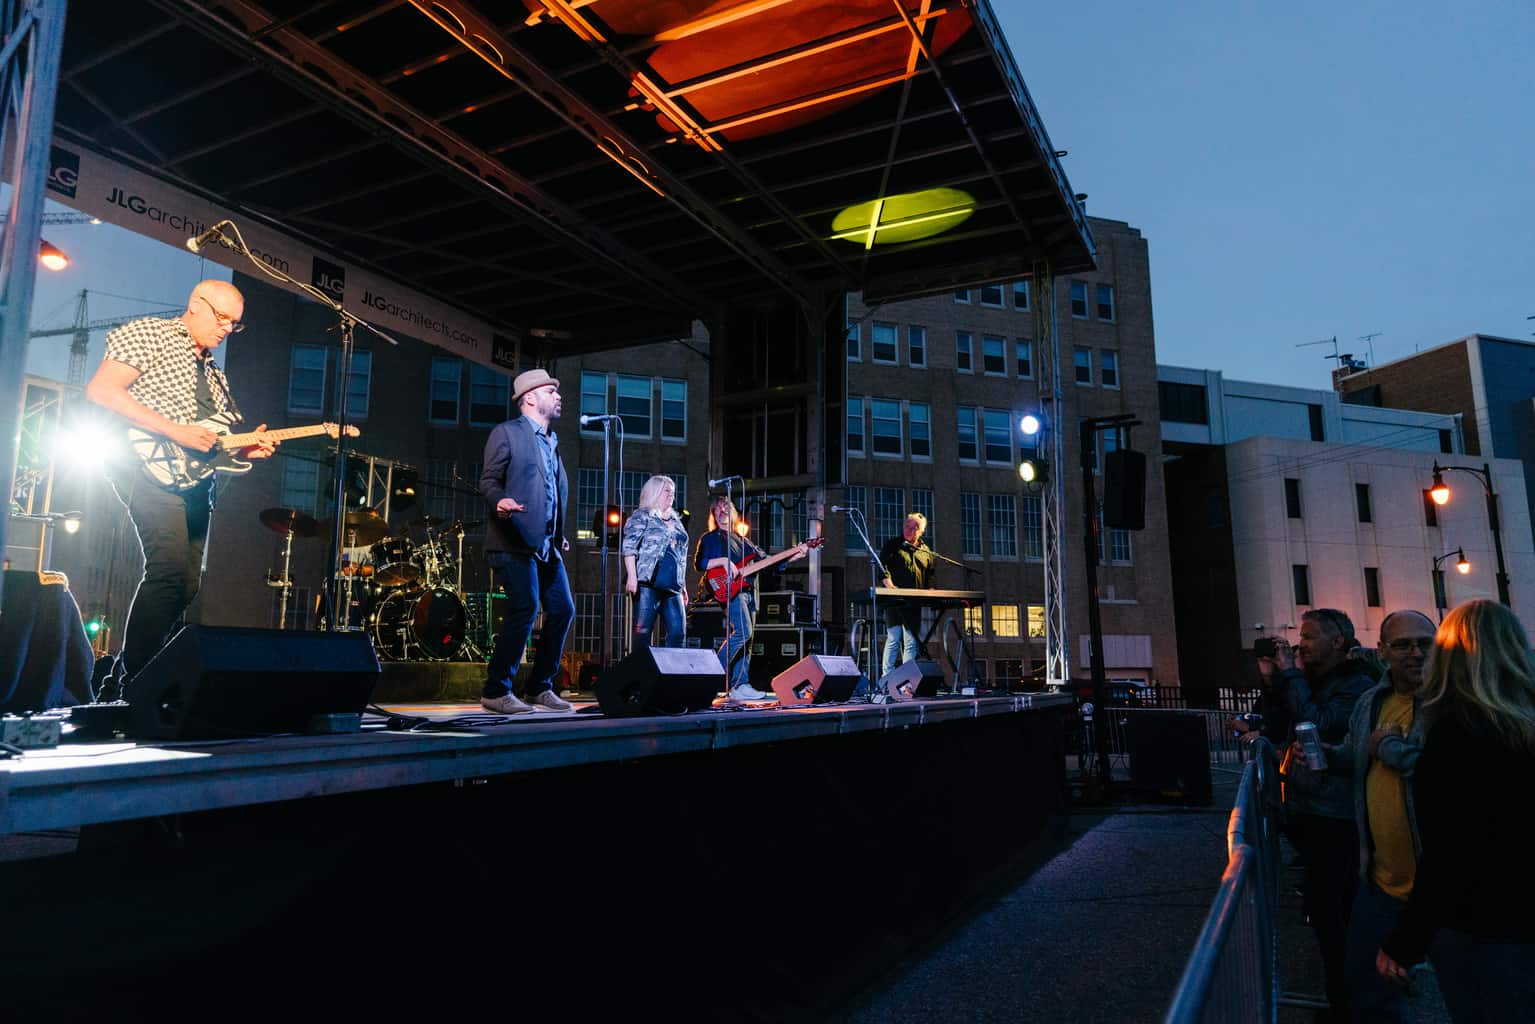 JLG’s 7th Annual “Rock the Streets” Concert Returns to Downtown Fargo